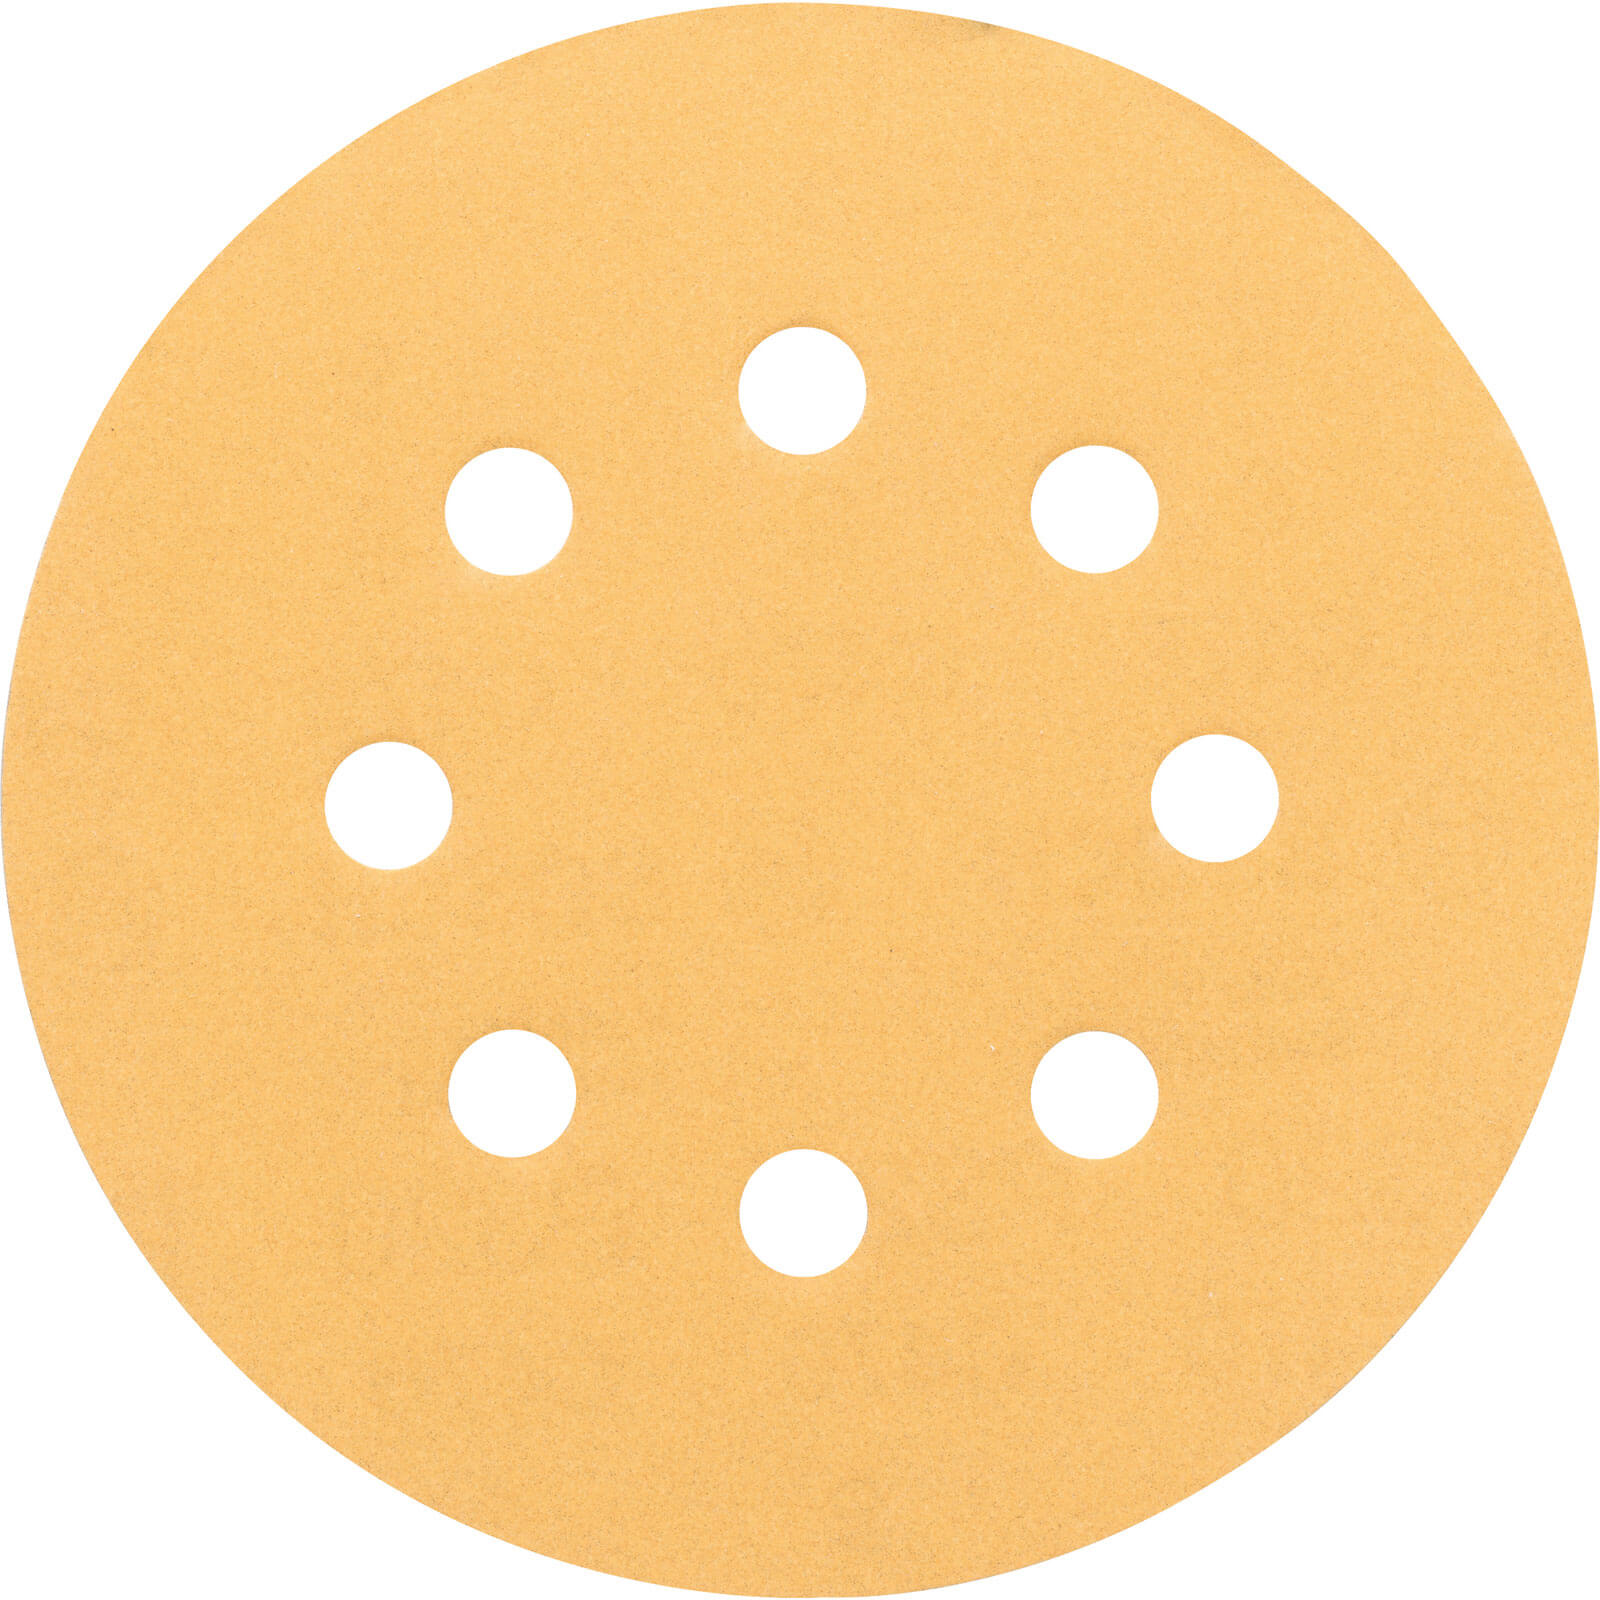 Photo of Bosch 125mm C470 Wood Sanding Disc 125mm 320g Pack Of 5